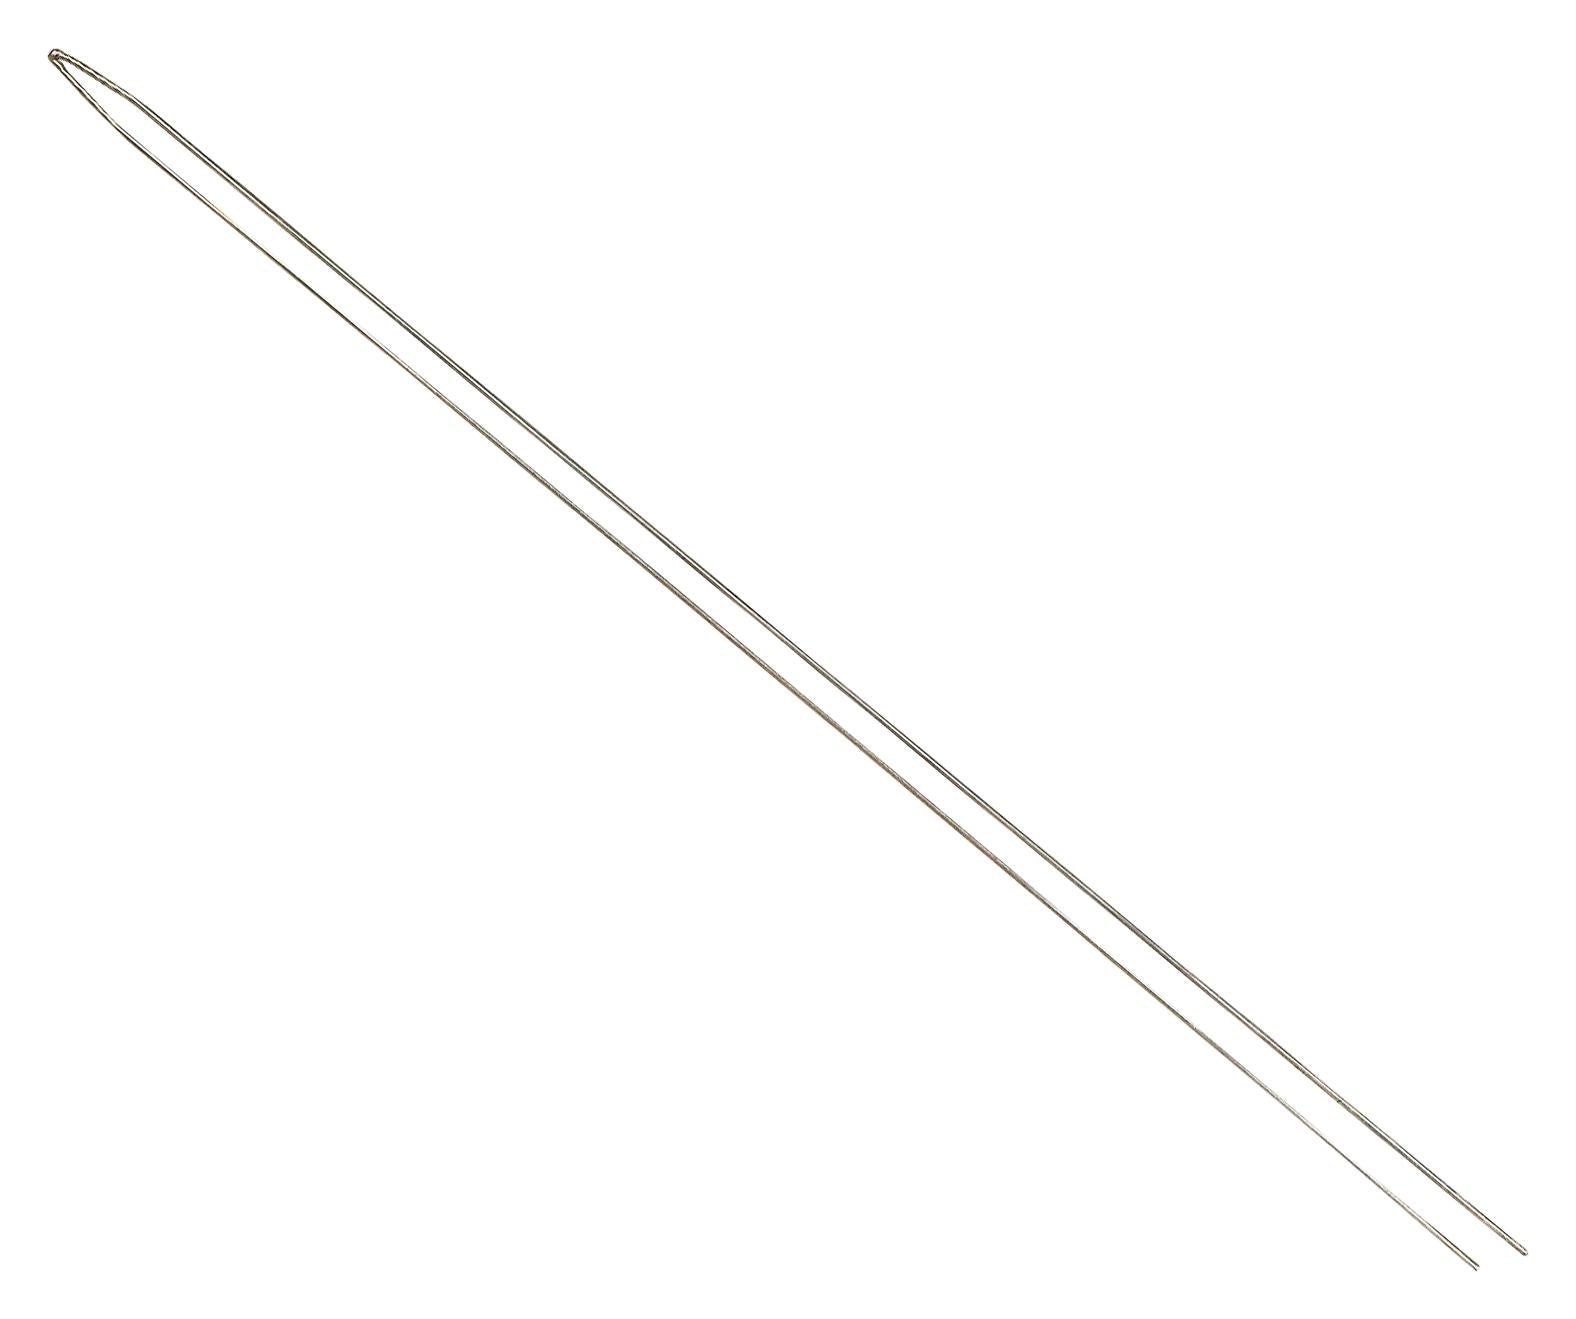 BARE-24-K-12 THERMOCOUPLE, TYPE K, 300MM OMEGA